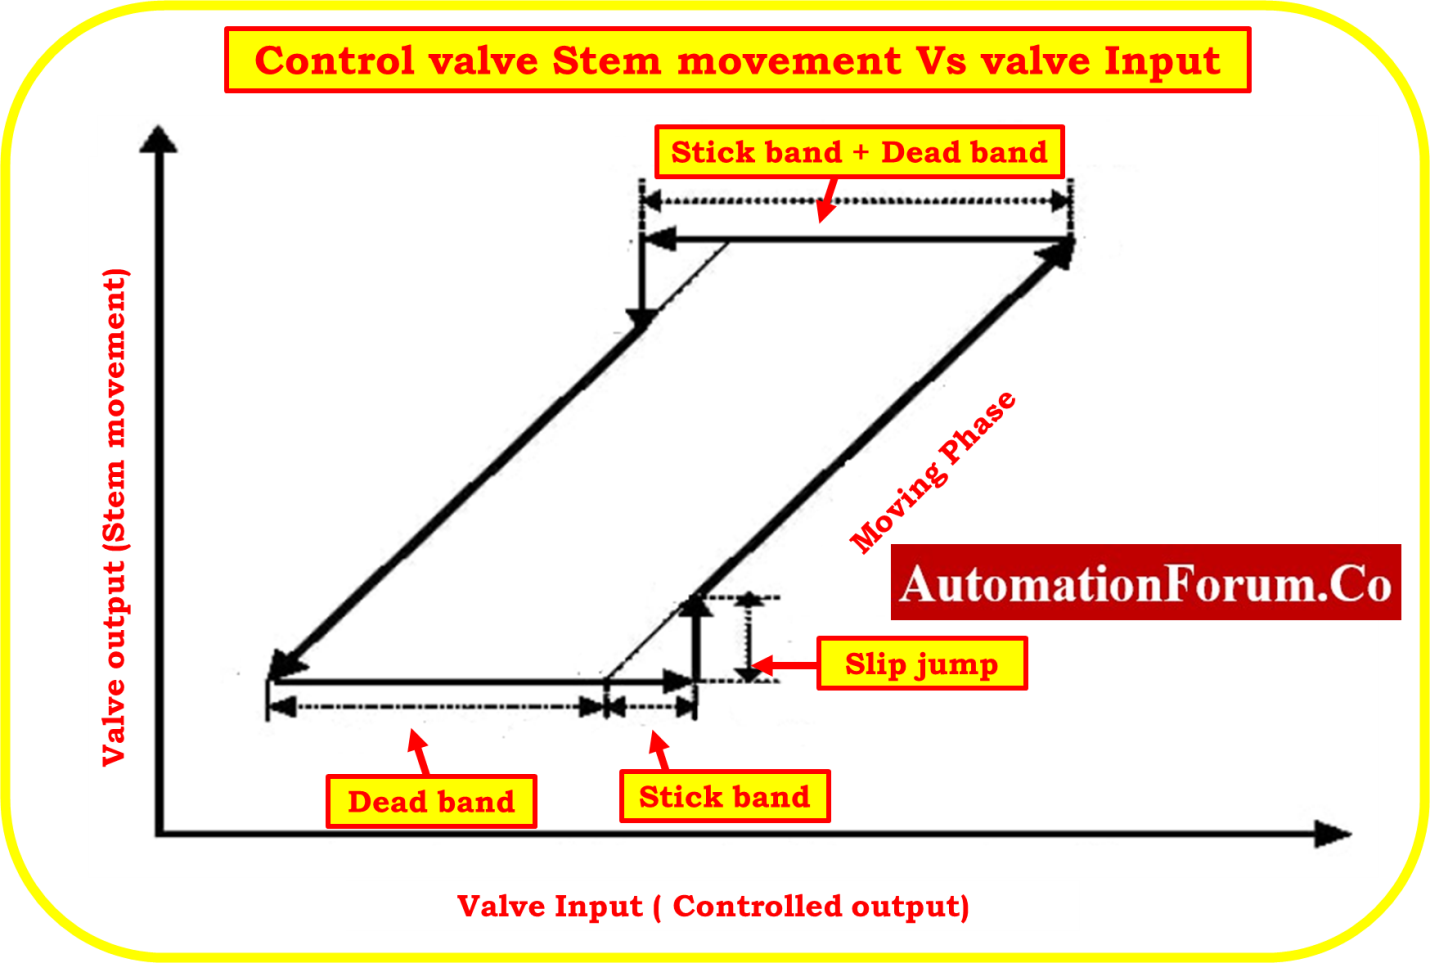 What are the main causes of control valve hunting?2